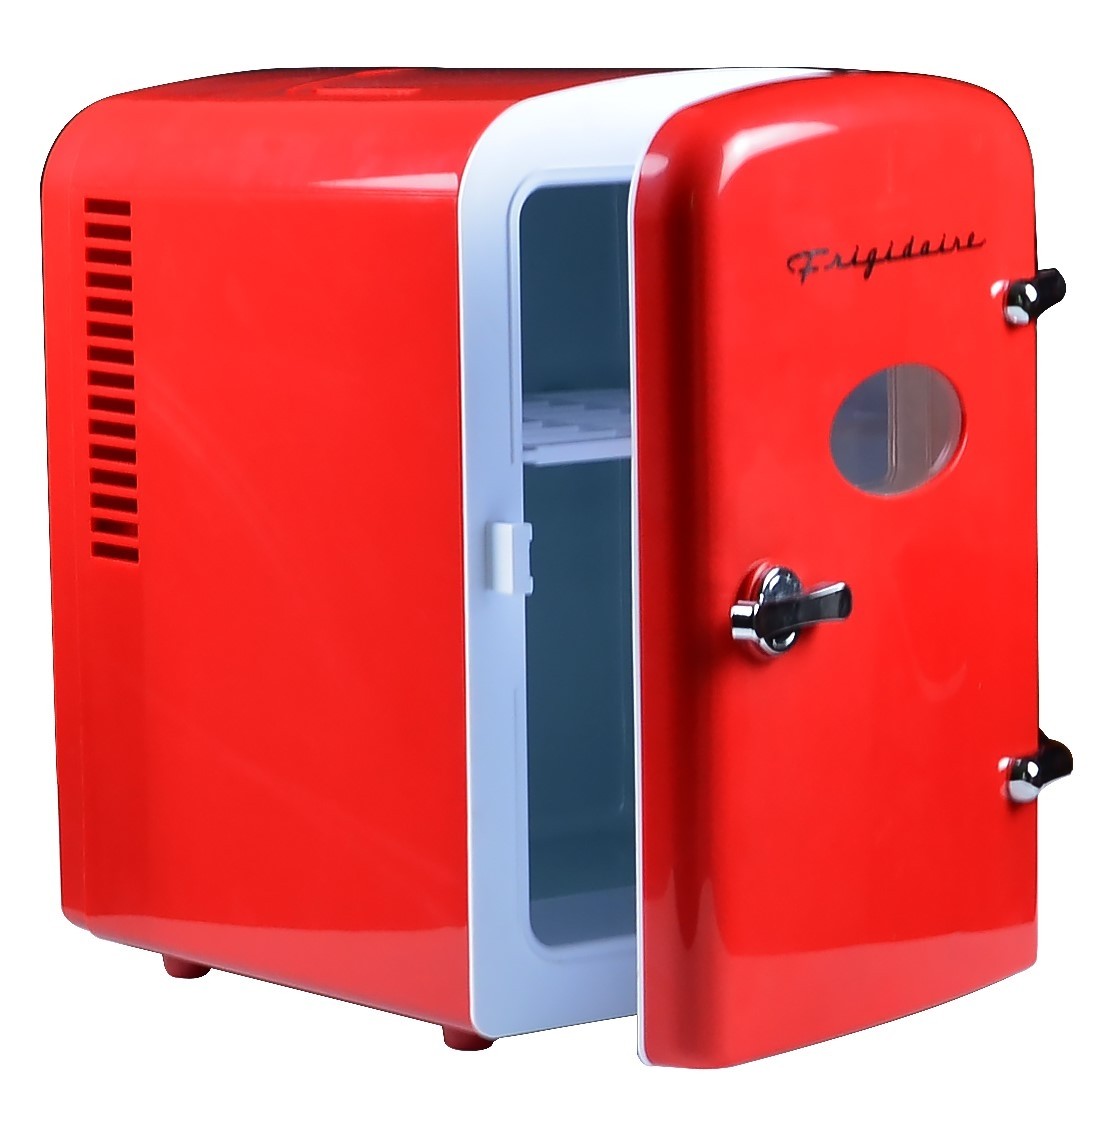 Frigidaire EFMIS129 Mini Portable Compact Personal Fridge Cools & Heats Includes Plugs for Home Outlet & 12V Car Charger-Red 100% Freon-Free & Eco Friendly Renewed 4 Liter Capacity Chills Six 12 oz Cans